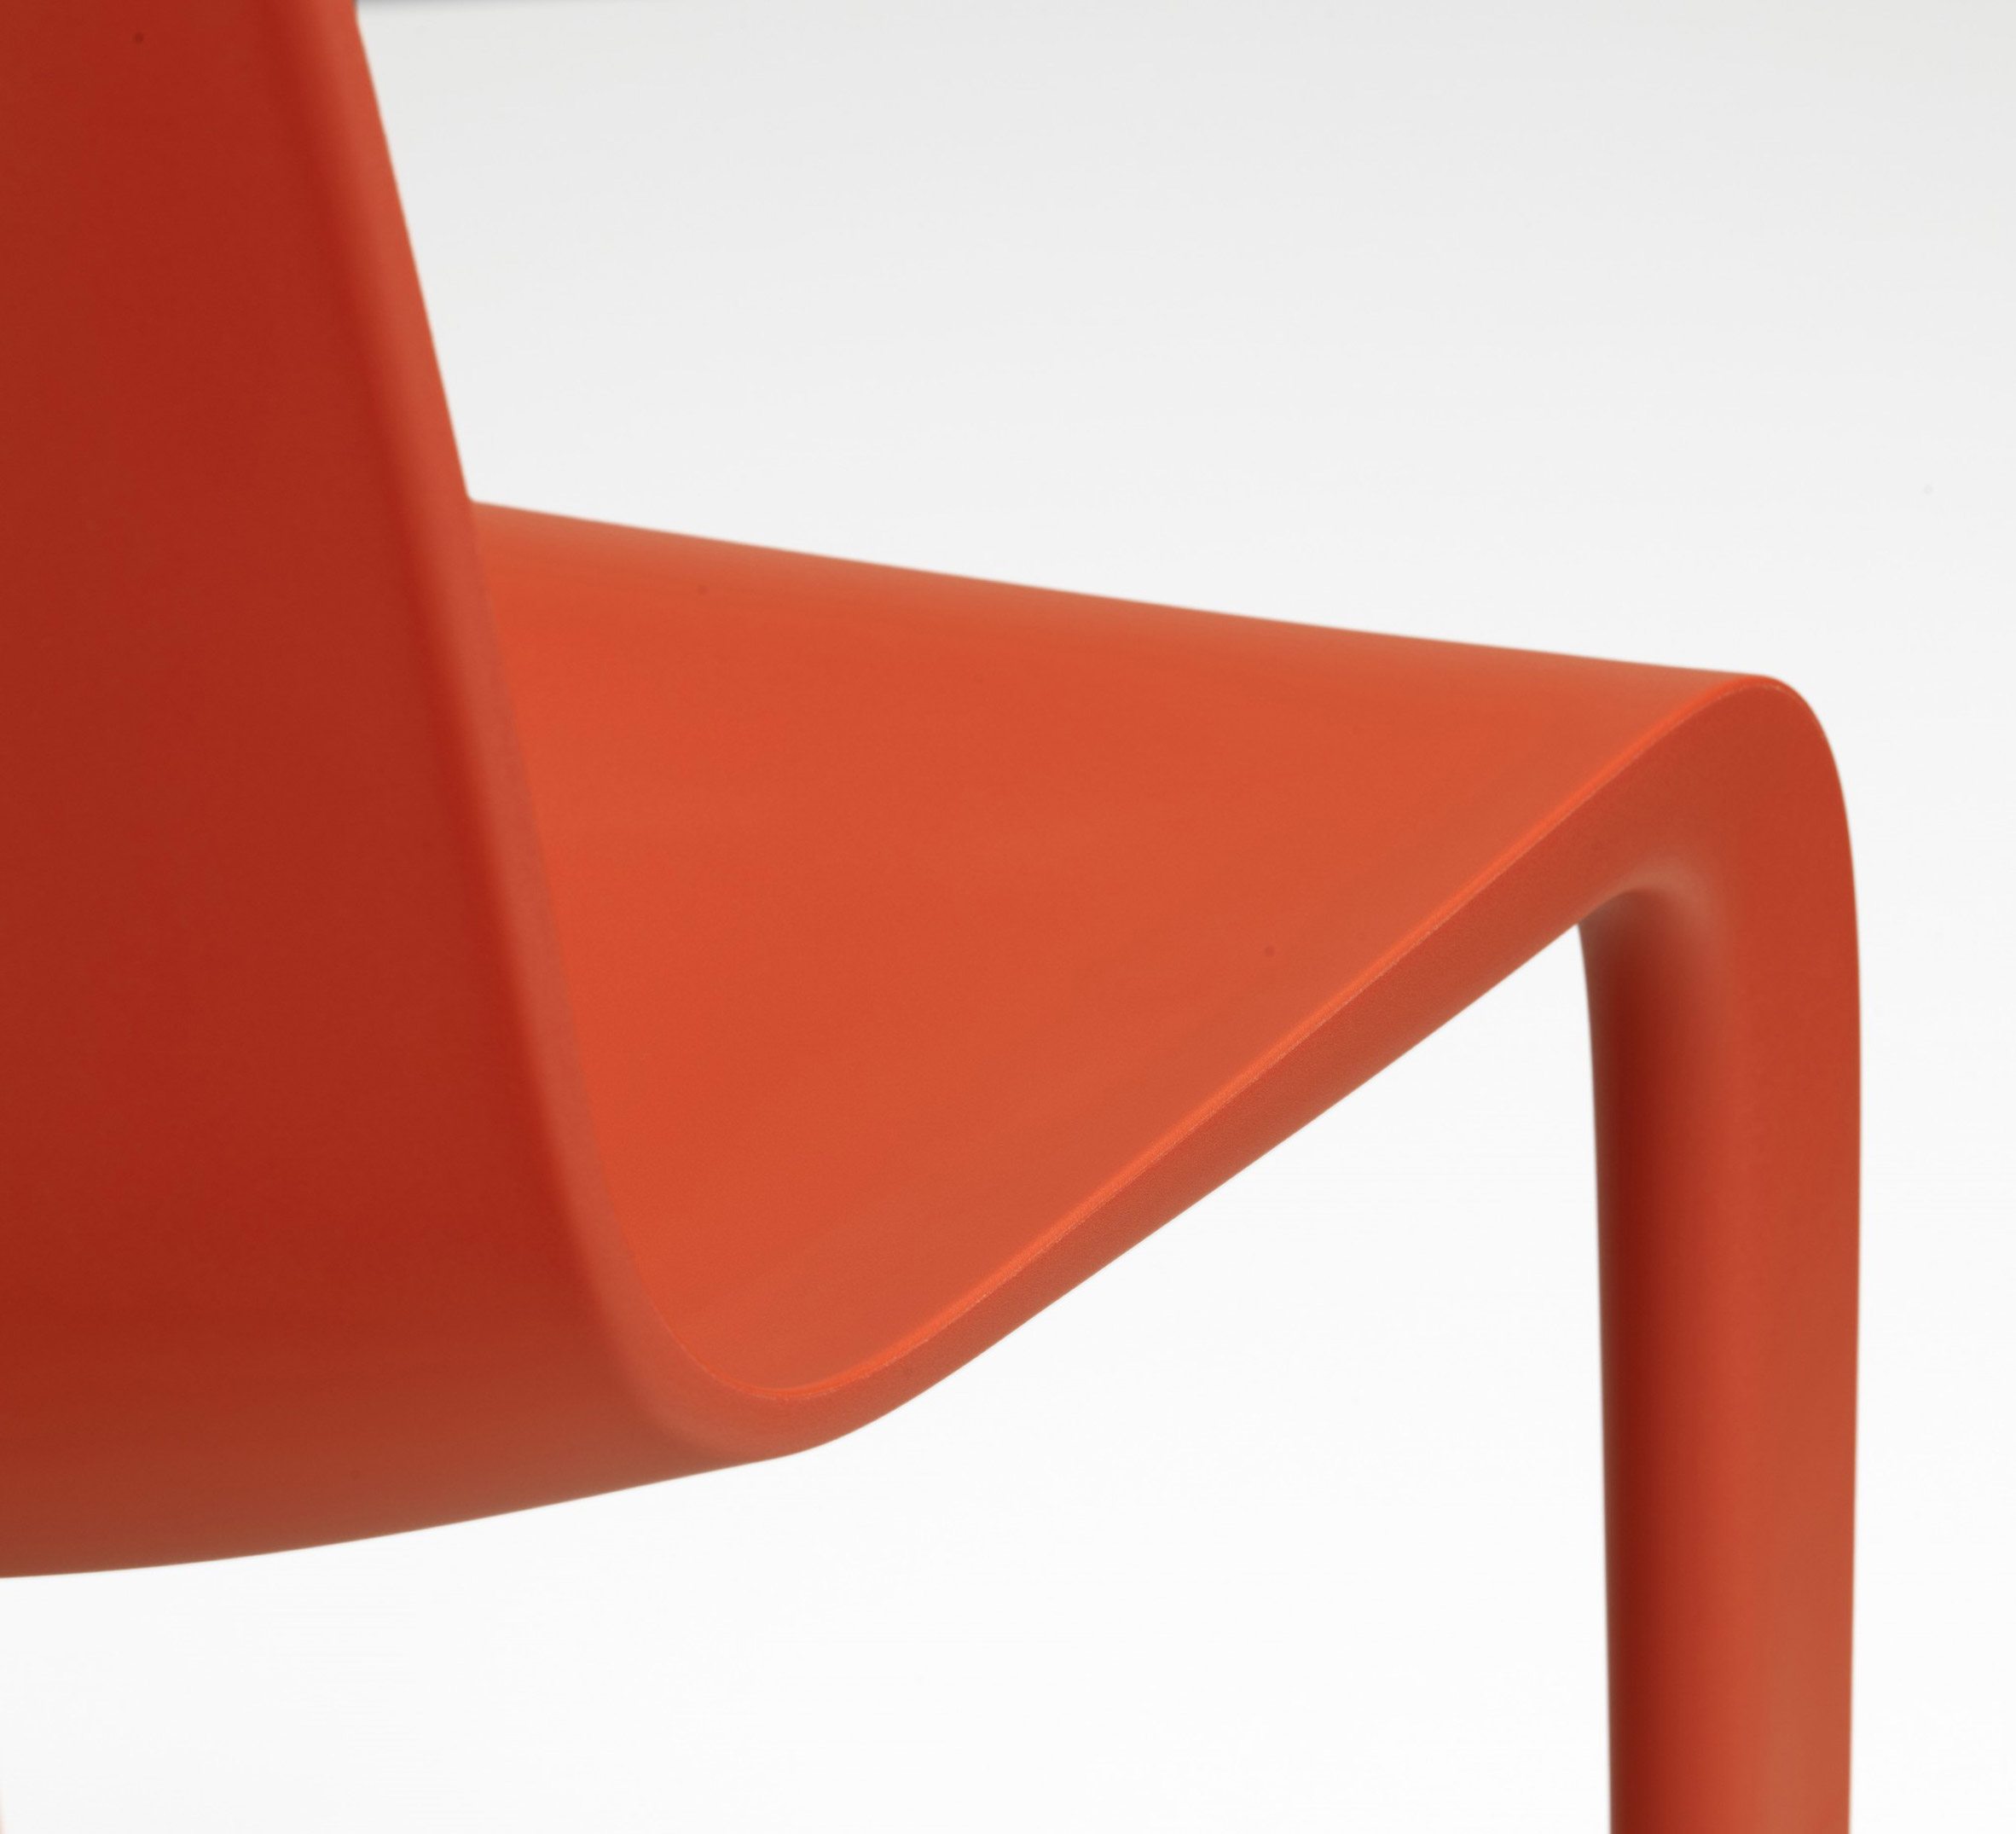 Close-up on the curved plastic shell seat of a red Evo-C chair